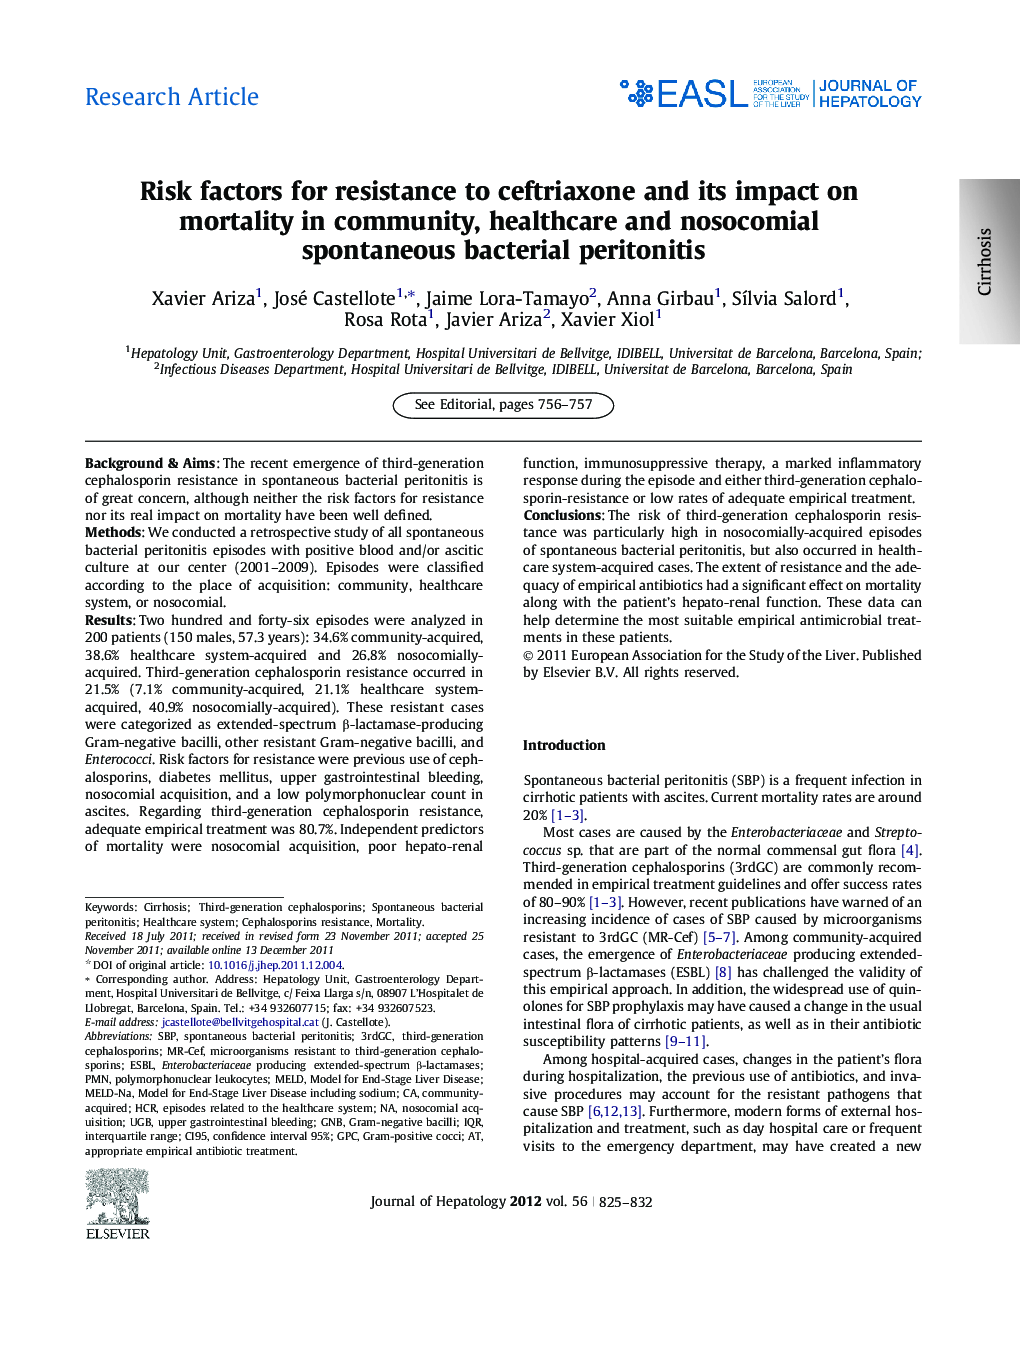 Research ArticleRisk factors for resistance to ceftriaxone and its impact on mortality in community, healthcare and nosocomial spontaneous bacterial peritonitis